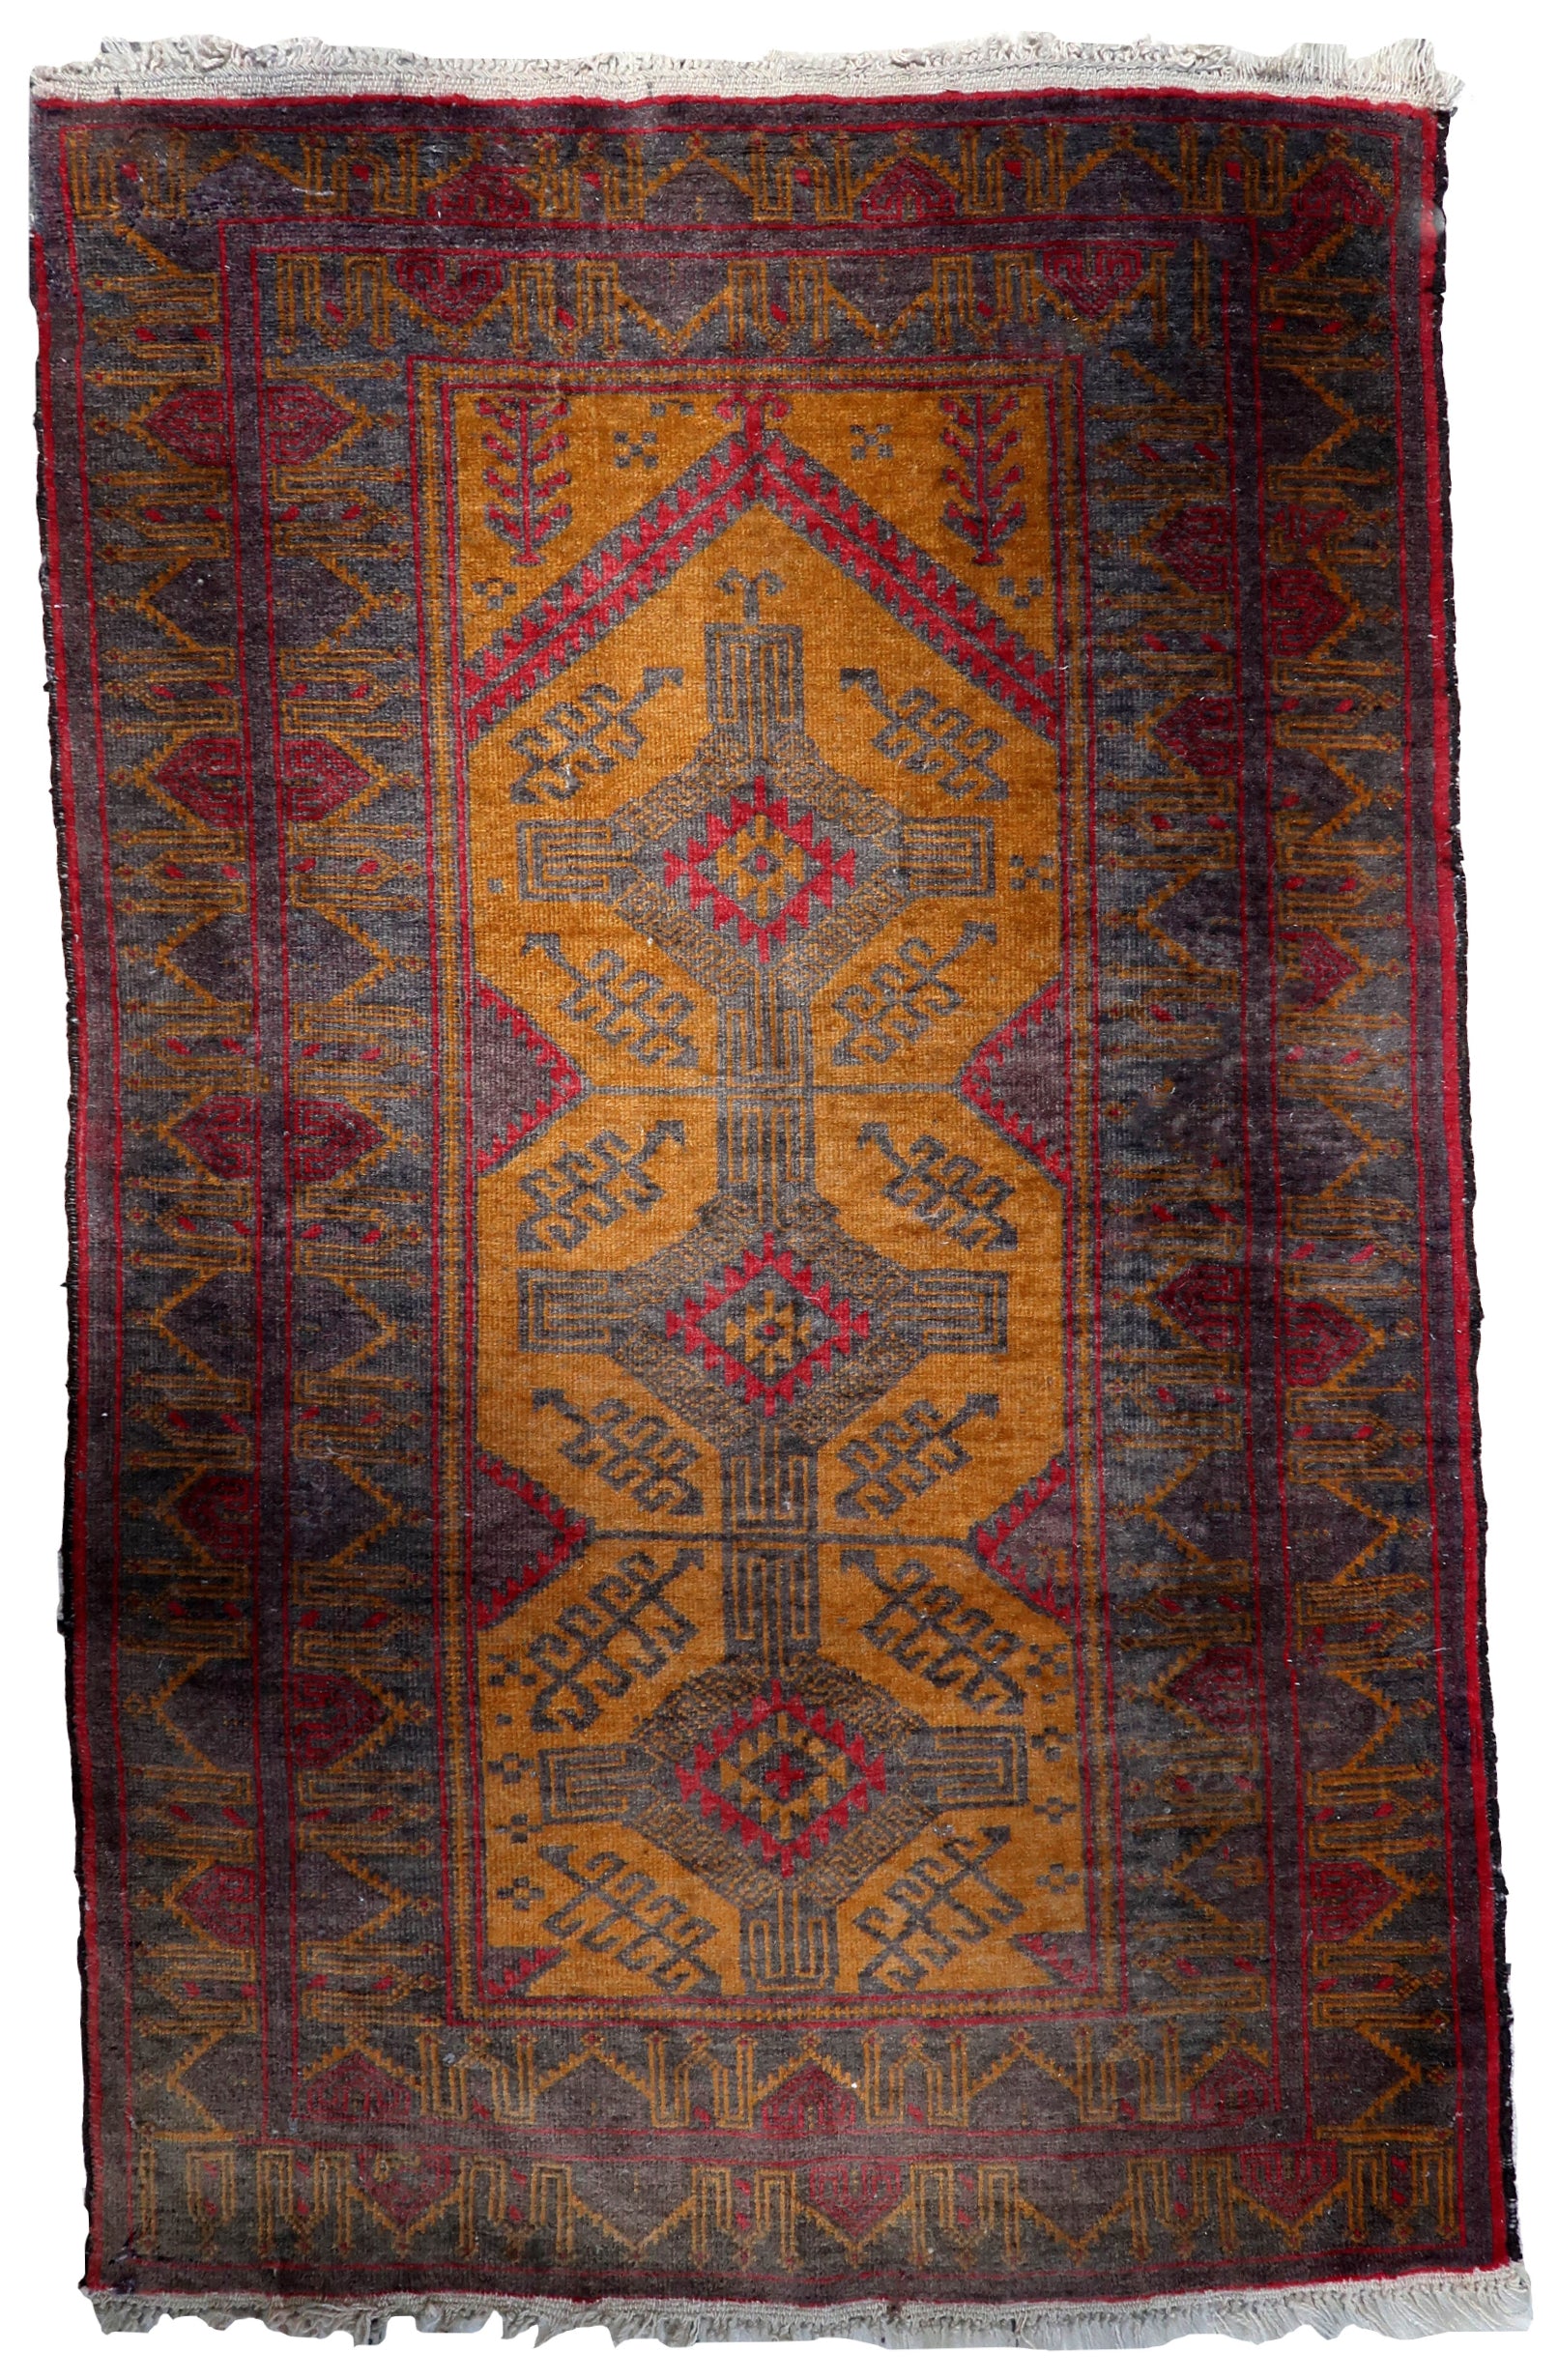 Handmade vintage Afghan Baluch rug showcasing vibrant fuchsia, orange, and greyish purple colors in a traditional Baluch style design